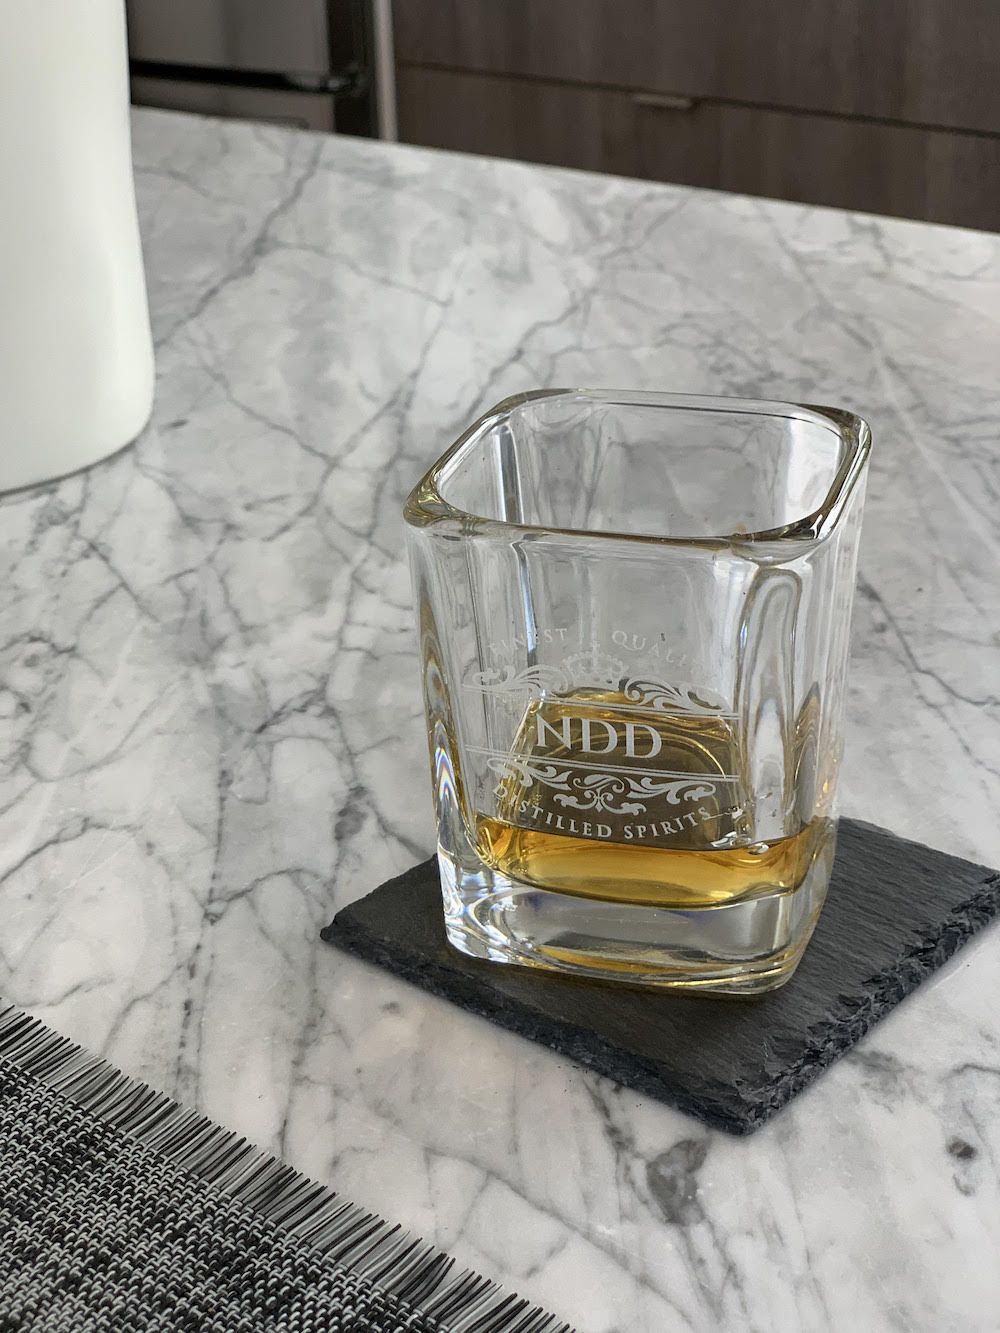 Getting My Groomsmen Customized Whiskey Accessories Seems